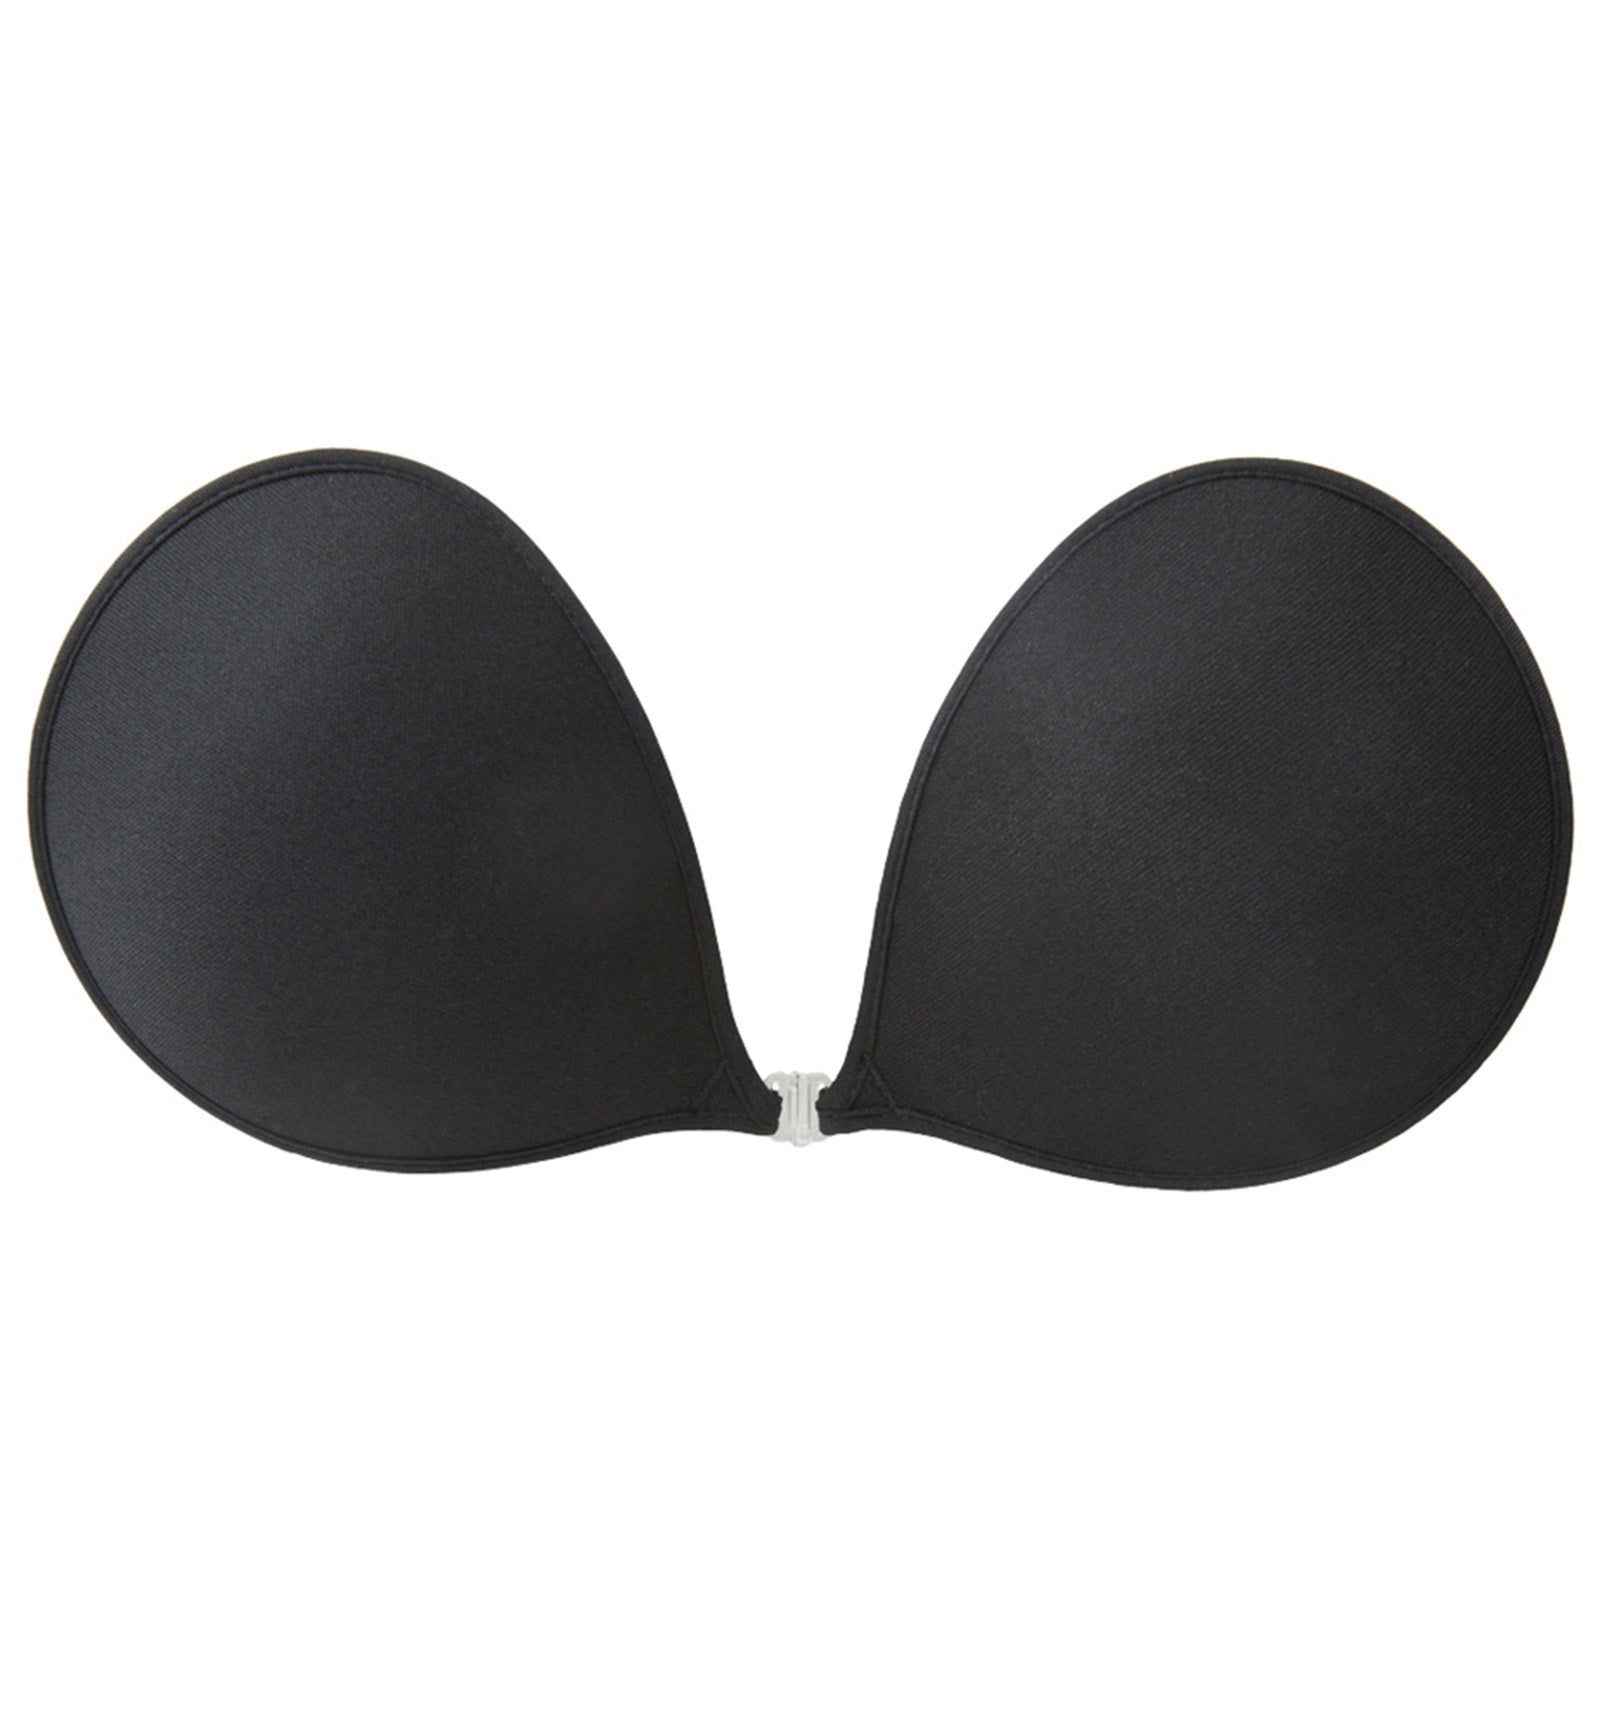 NuBra - The beauty of NuBra adhesive bras is that it gives women instant  cleavage just with a simple clip! Every bra already comes with them  attached. For larger busts we separately